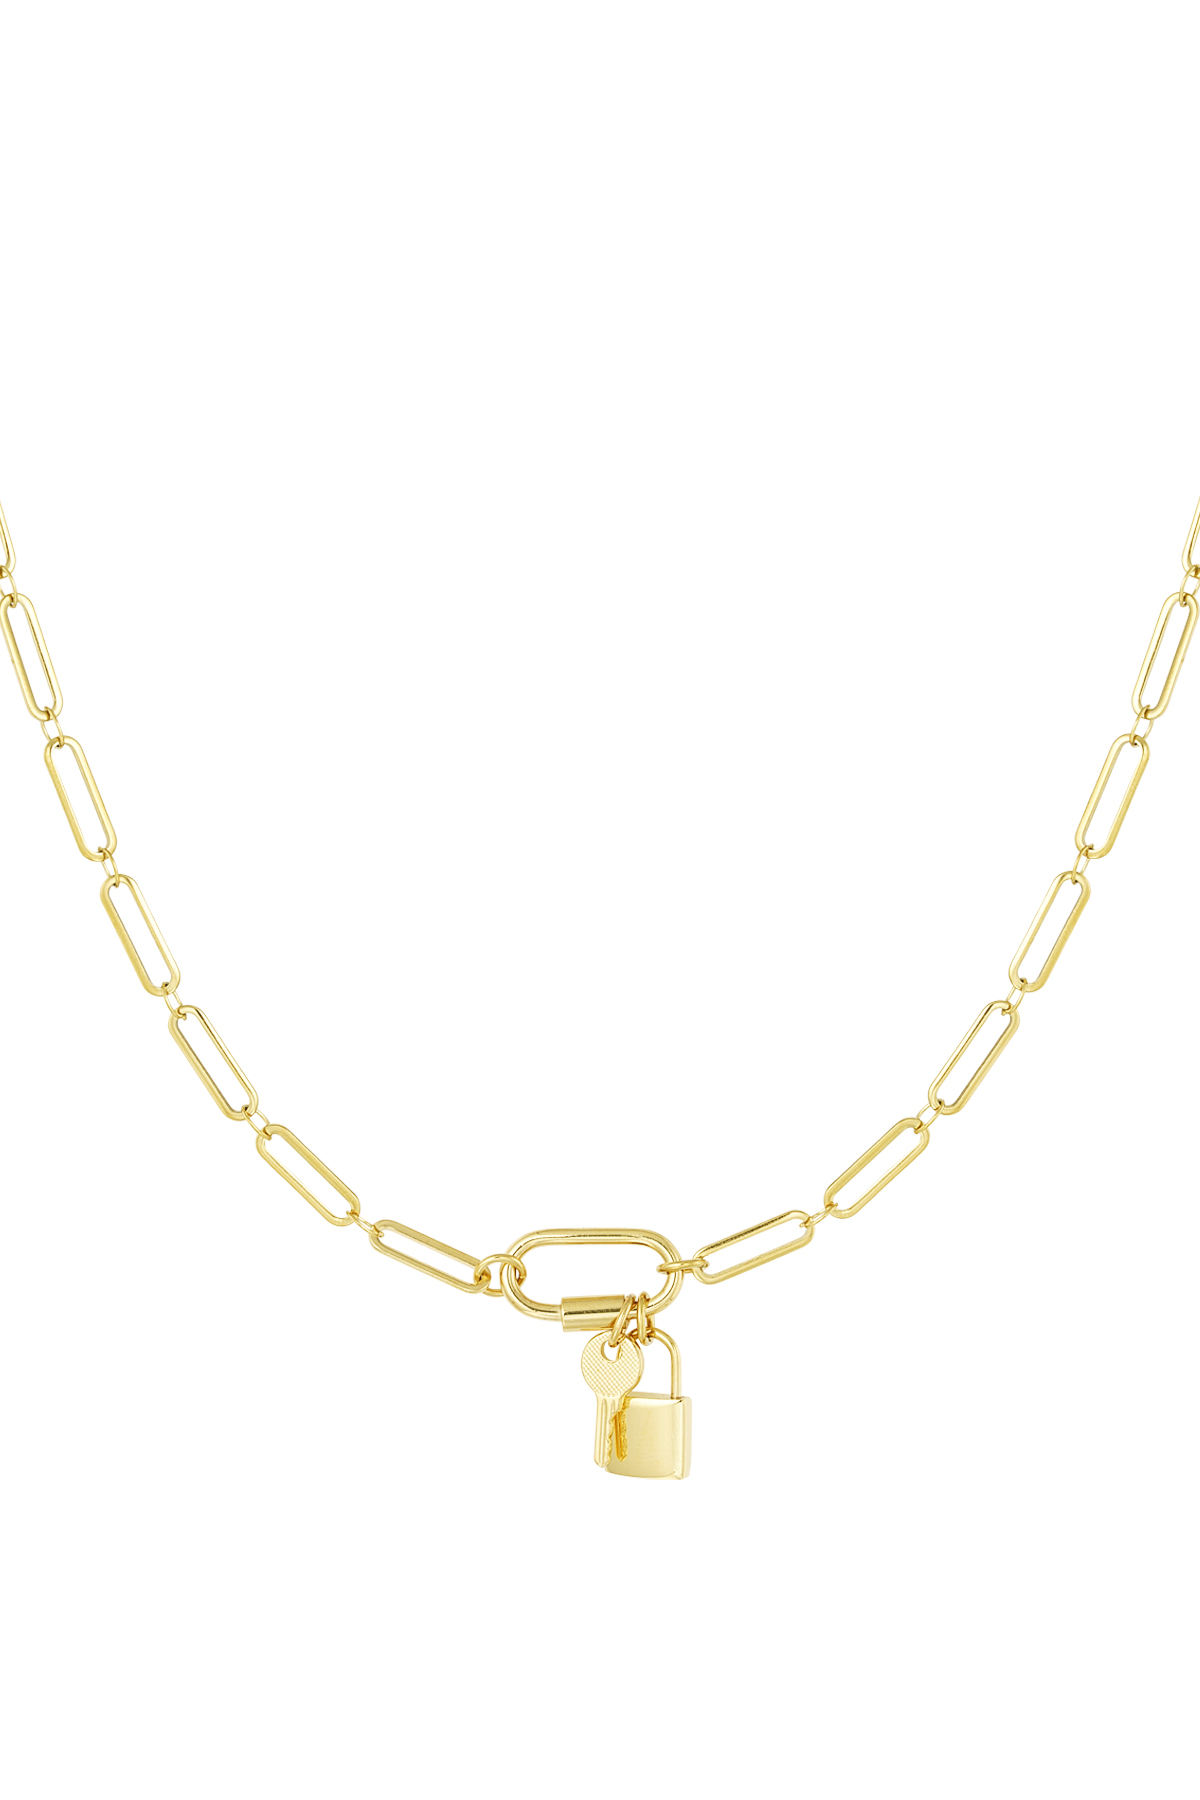 Chain links with lock and key - gold h5 